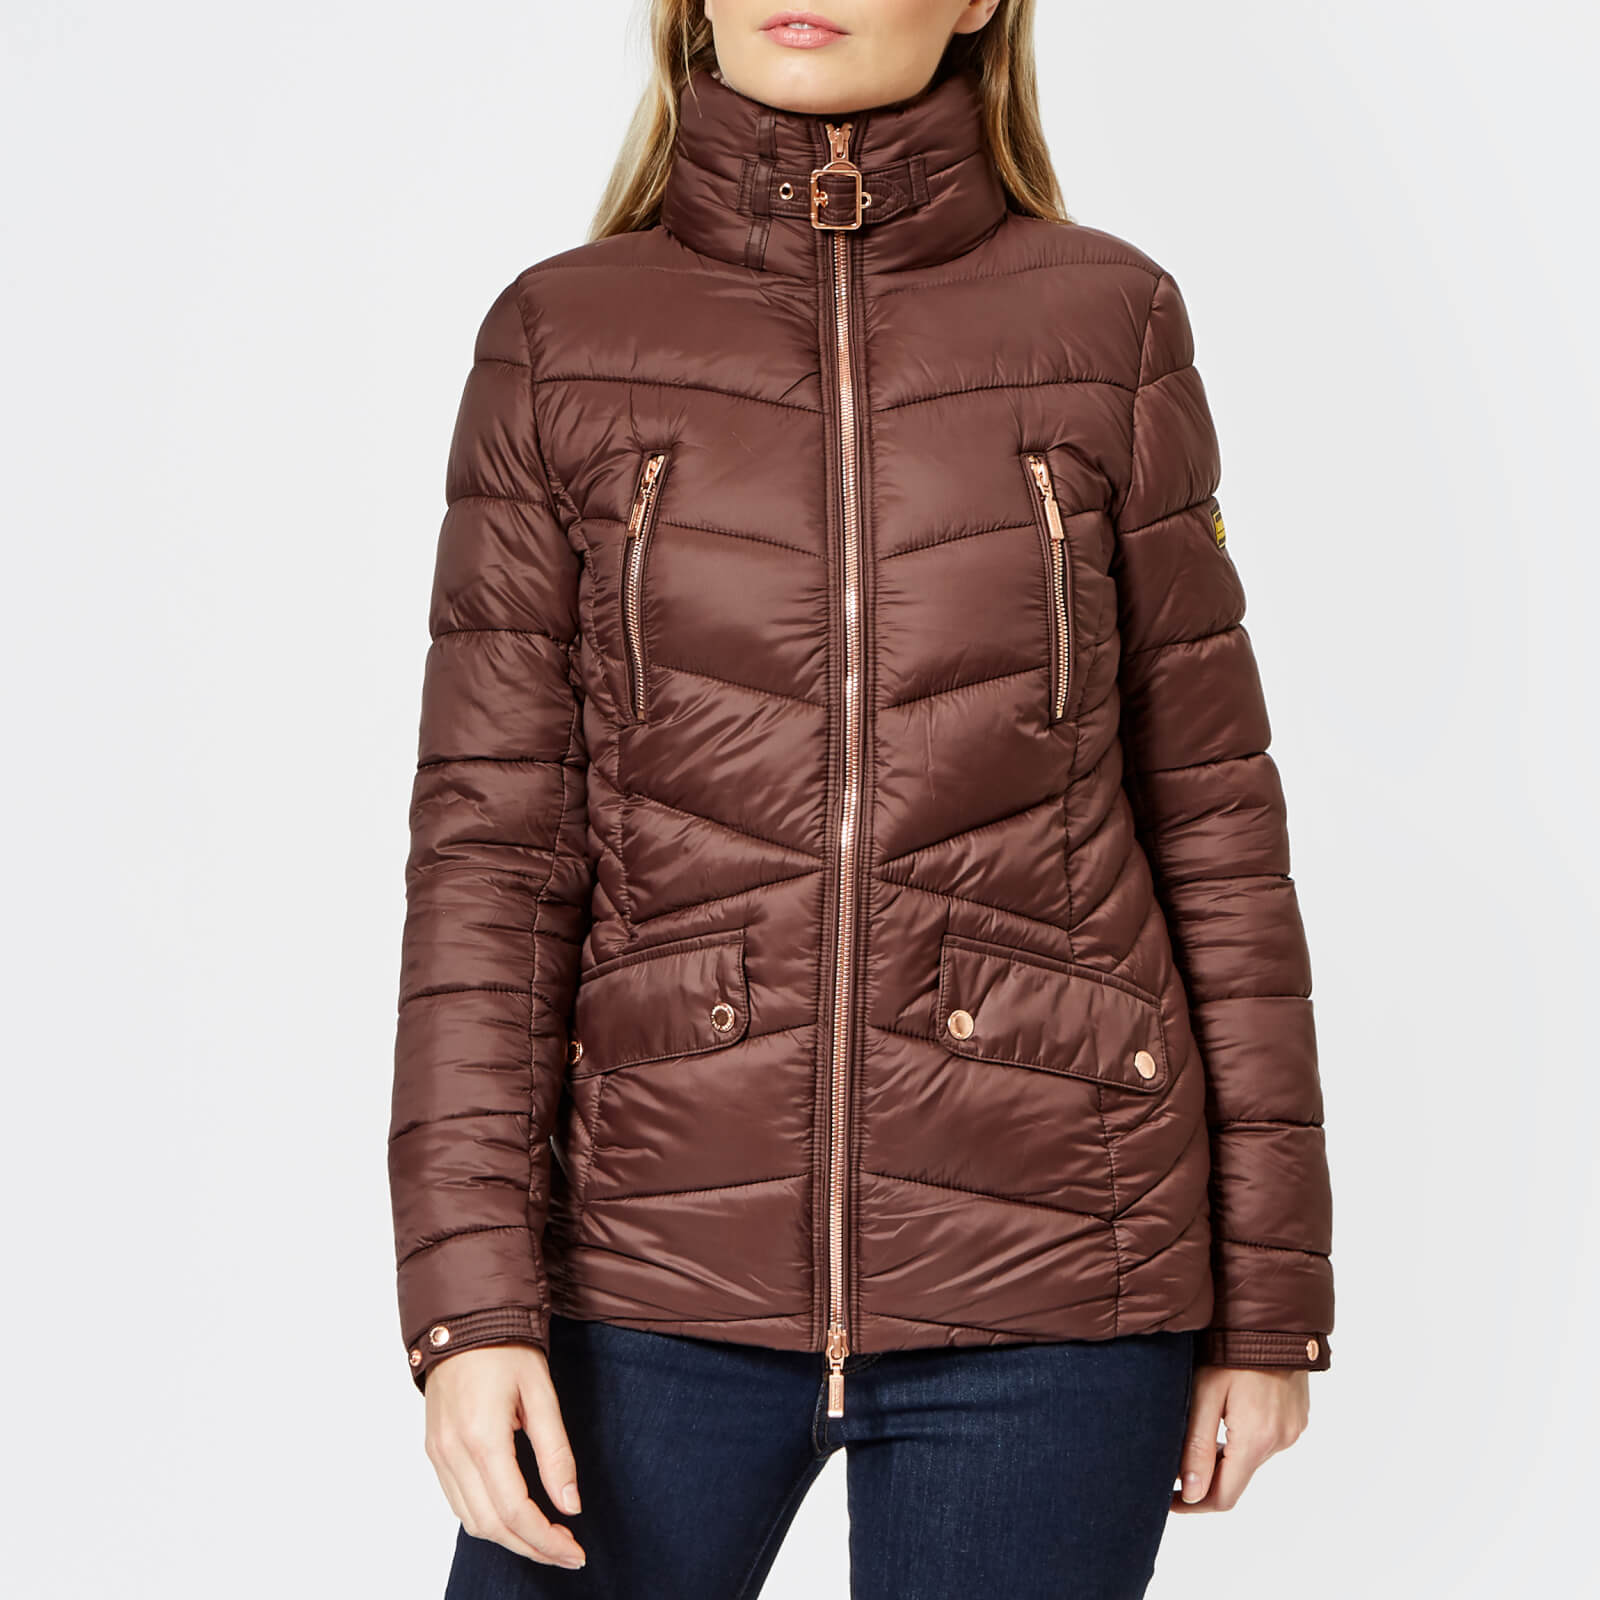 barbour autocross cocoa quilted jacket